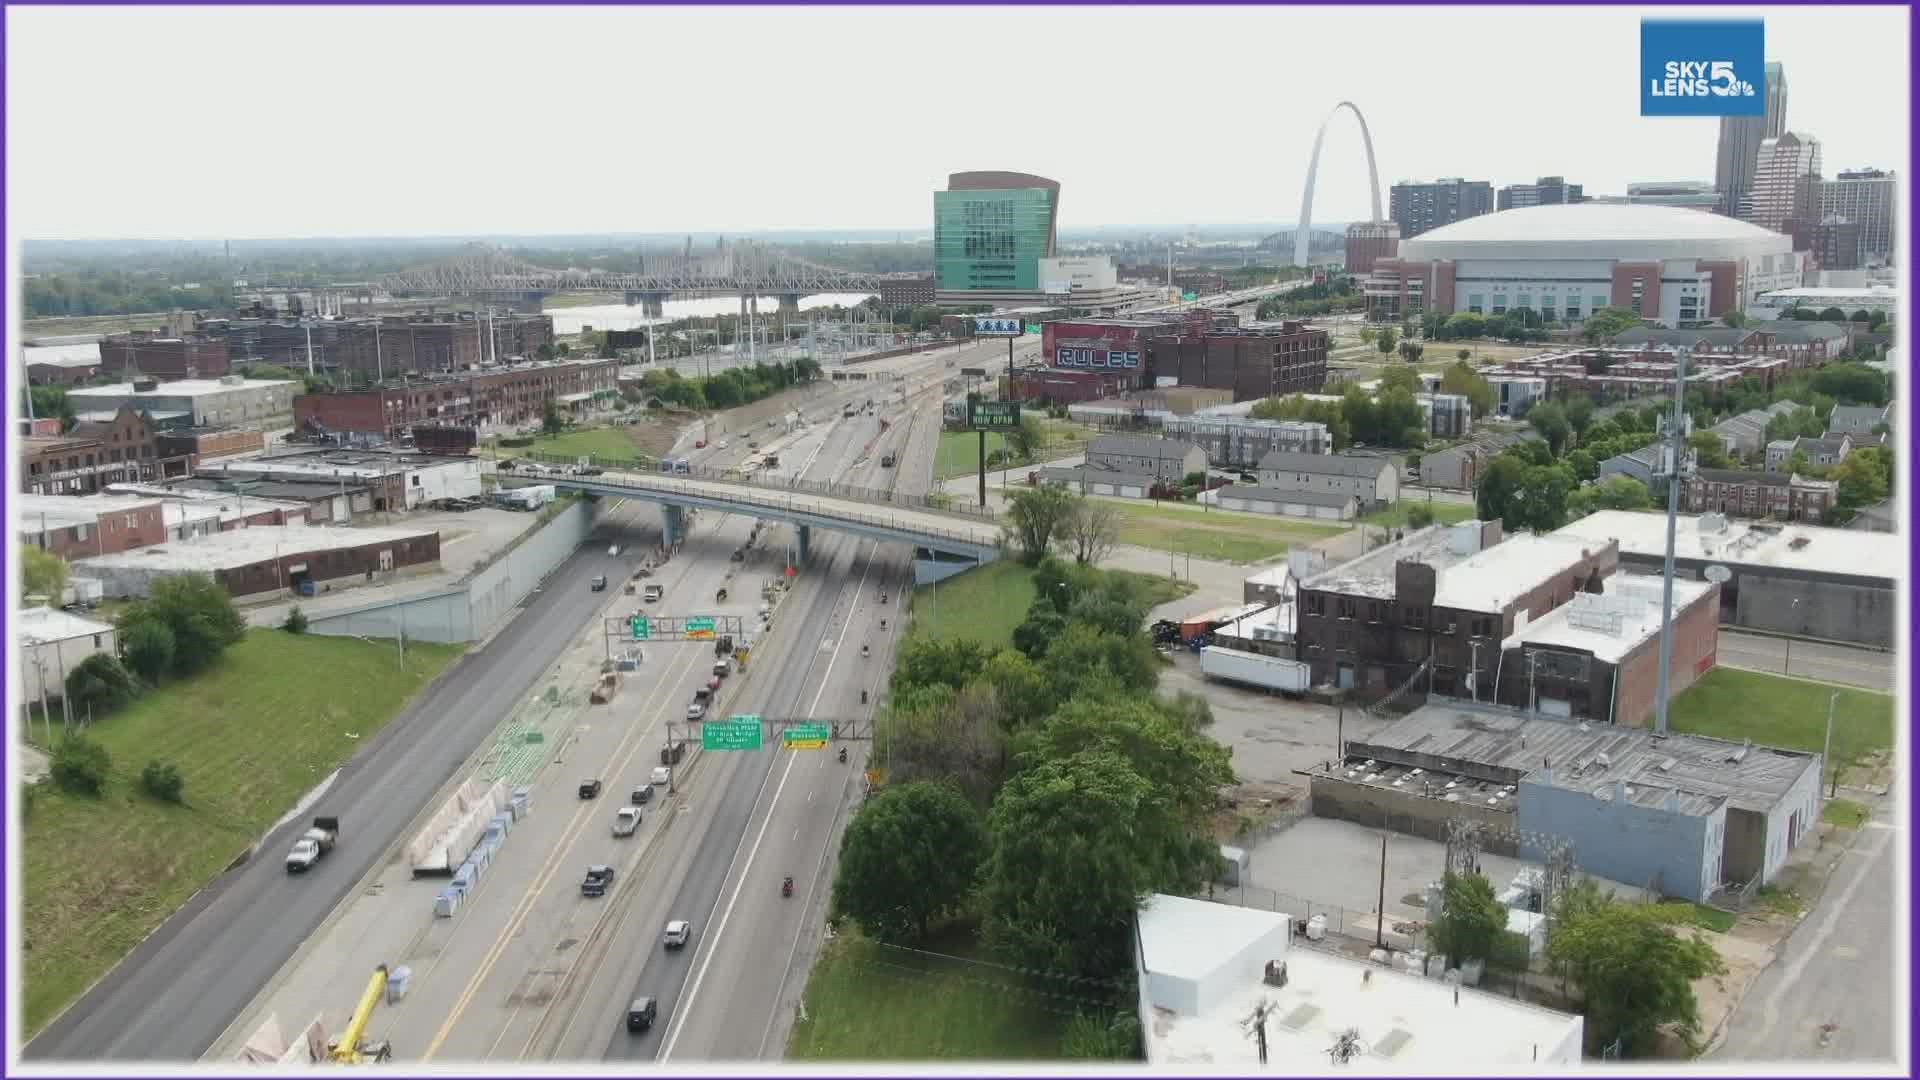 MoDOT warned drivers should expect significant delays when the downtown portion of I-44 closes Sept. 23-26 for roadwork.